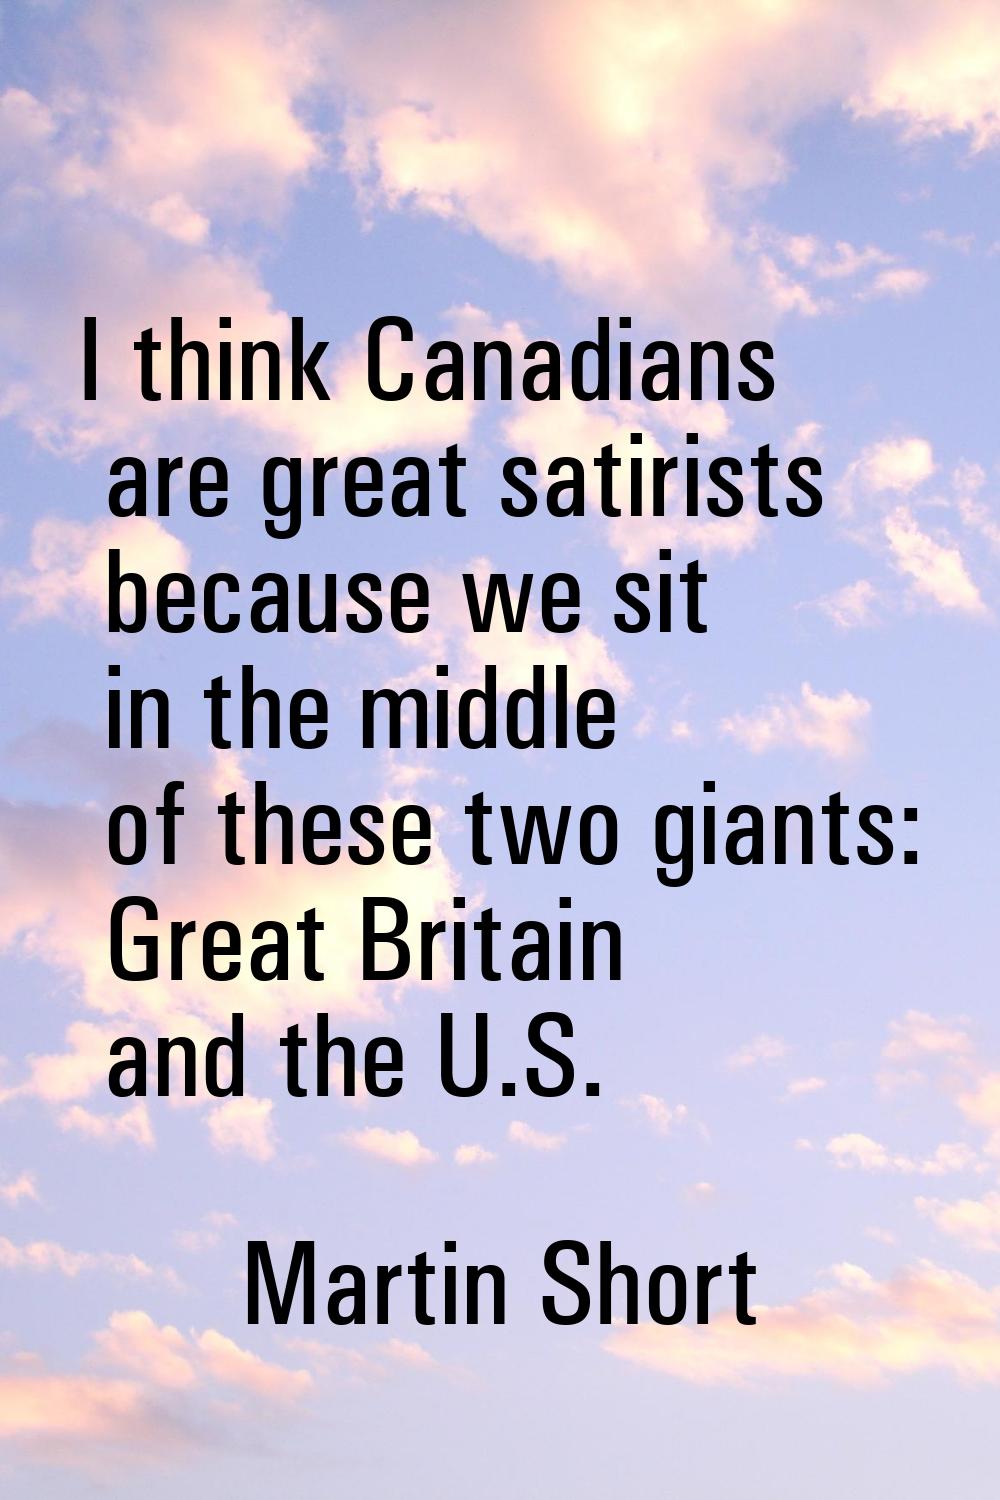 I think Canadians are great satirists because we sit in the middle of these two giants: Great Brita